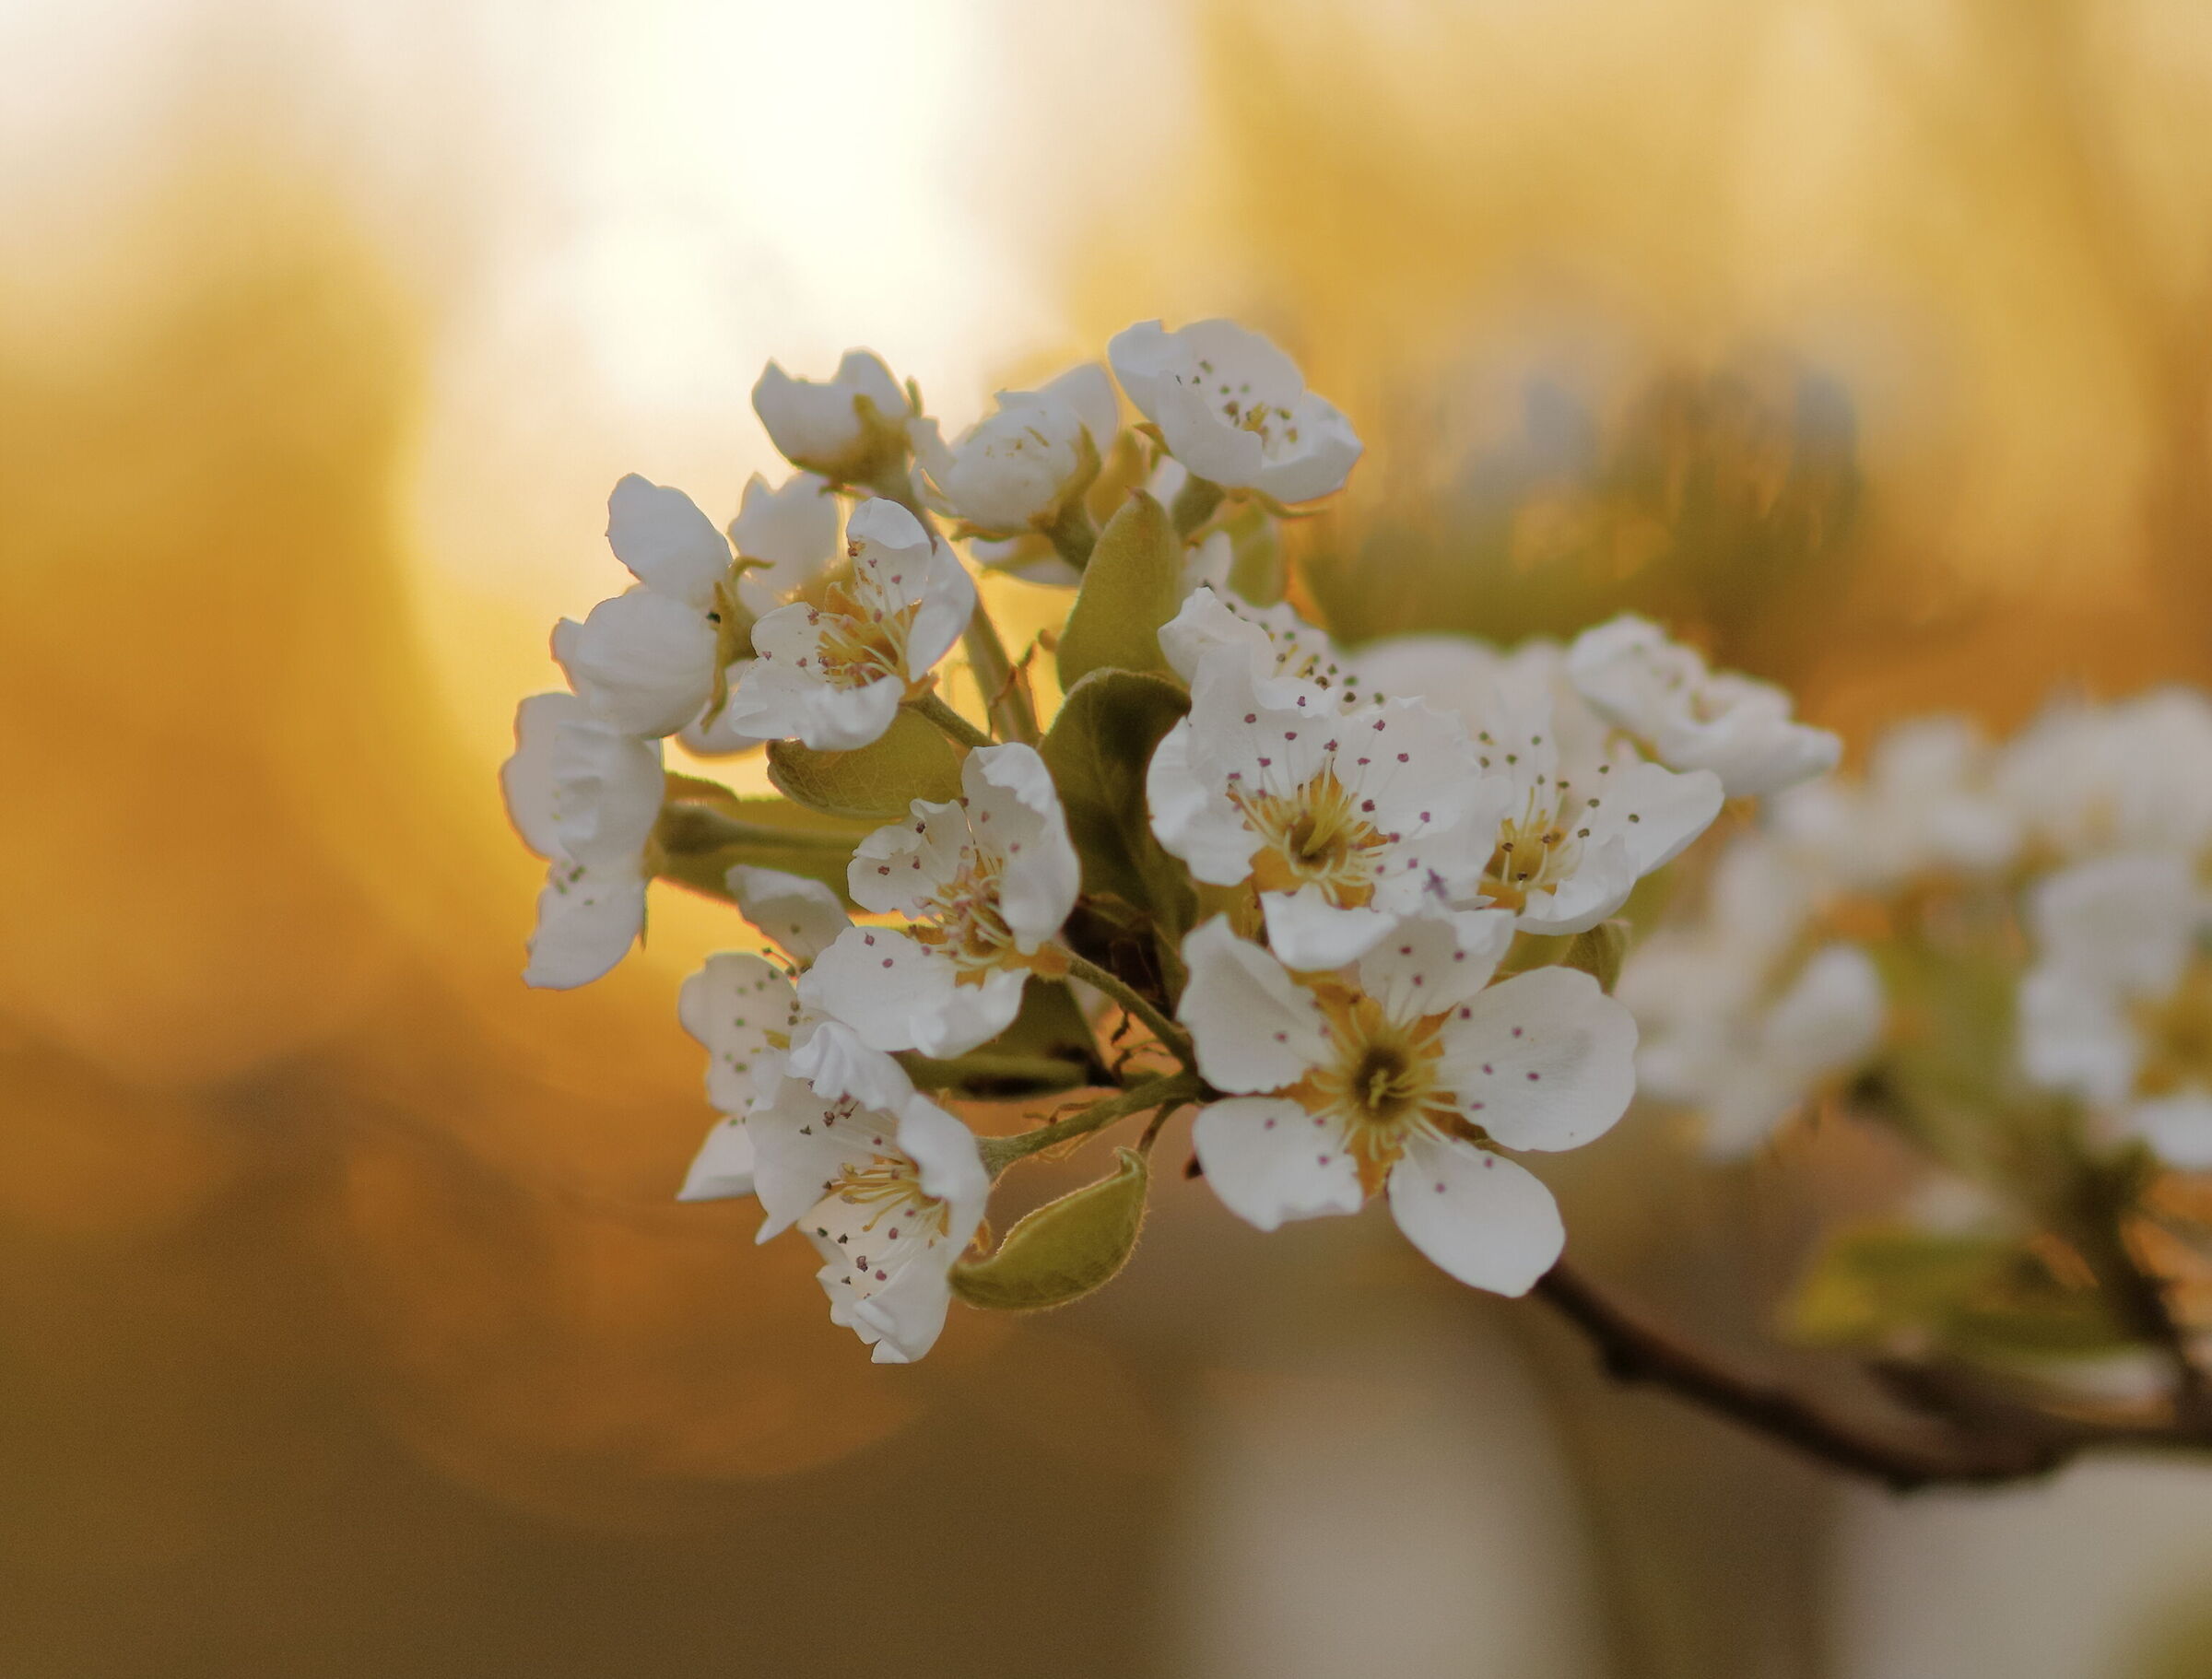 Pear blossoms at sunset...